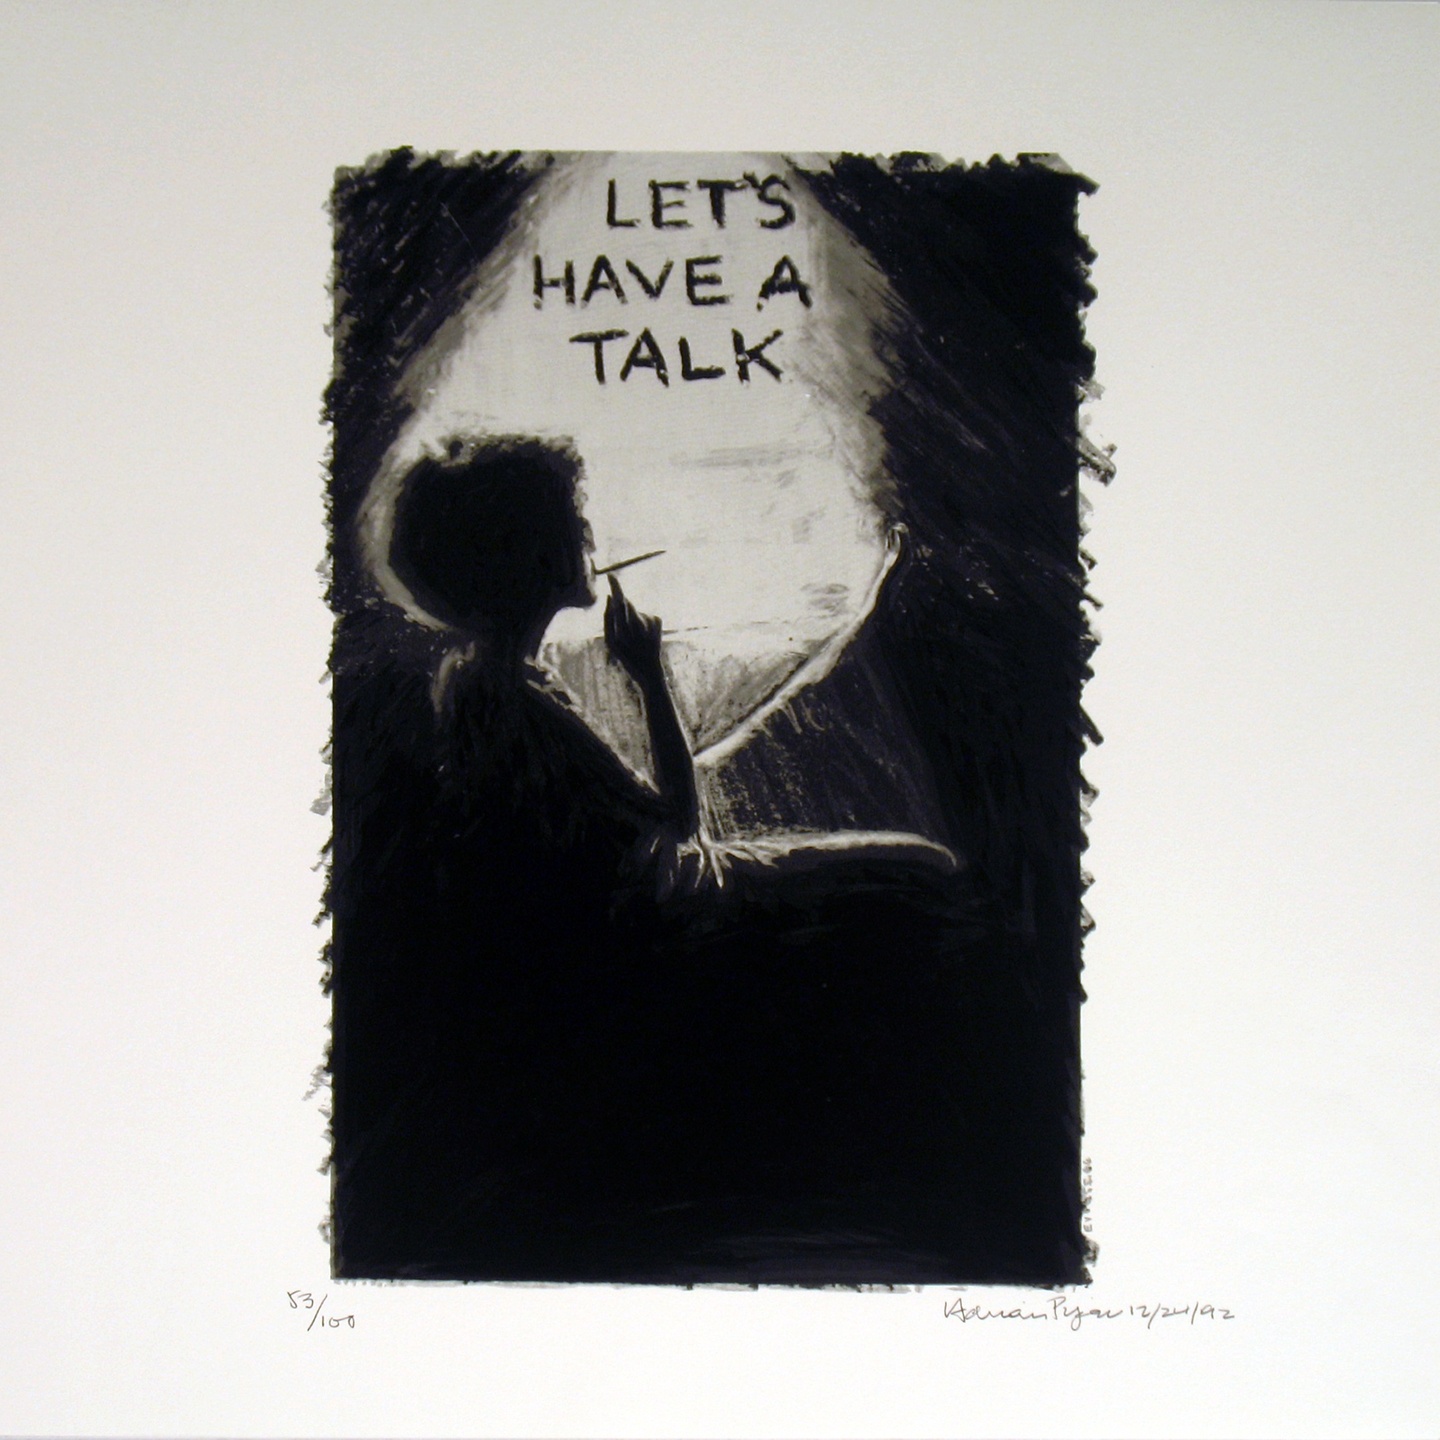 A print of a figure seated in front of a window, smoking a cigarette, with the words "Let's Have a Talk" above